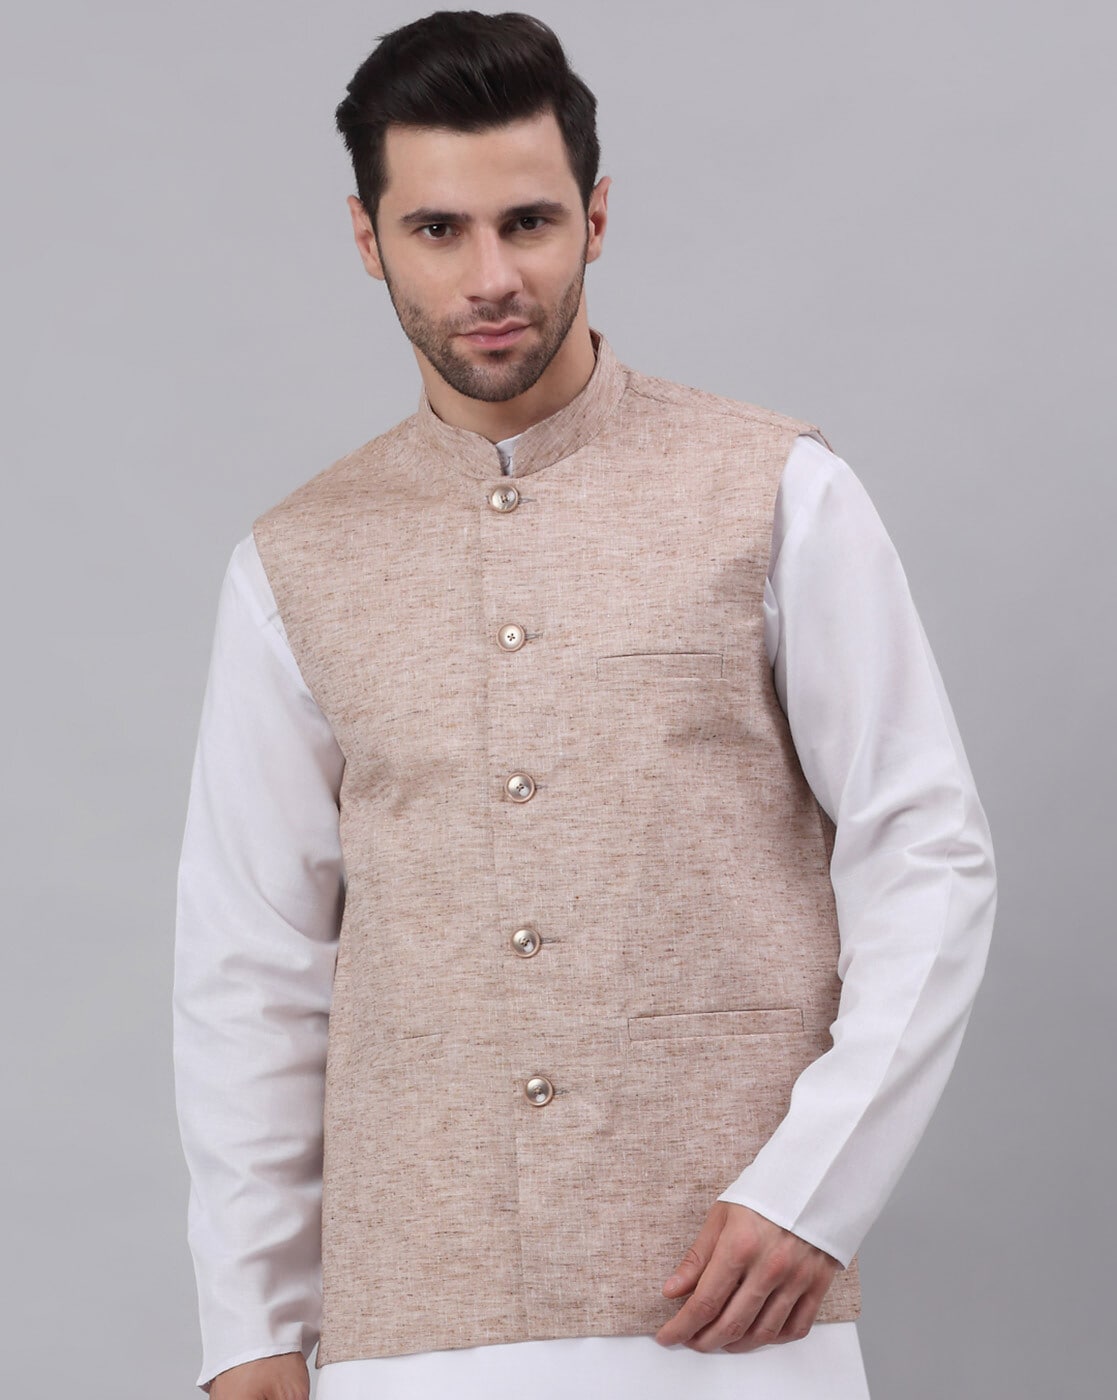 Nehru jacket, the 'it' style factor for men - Times of India